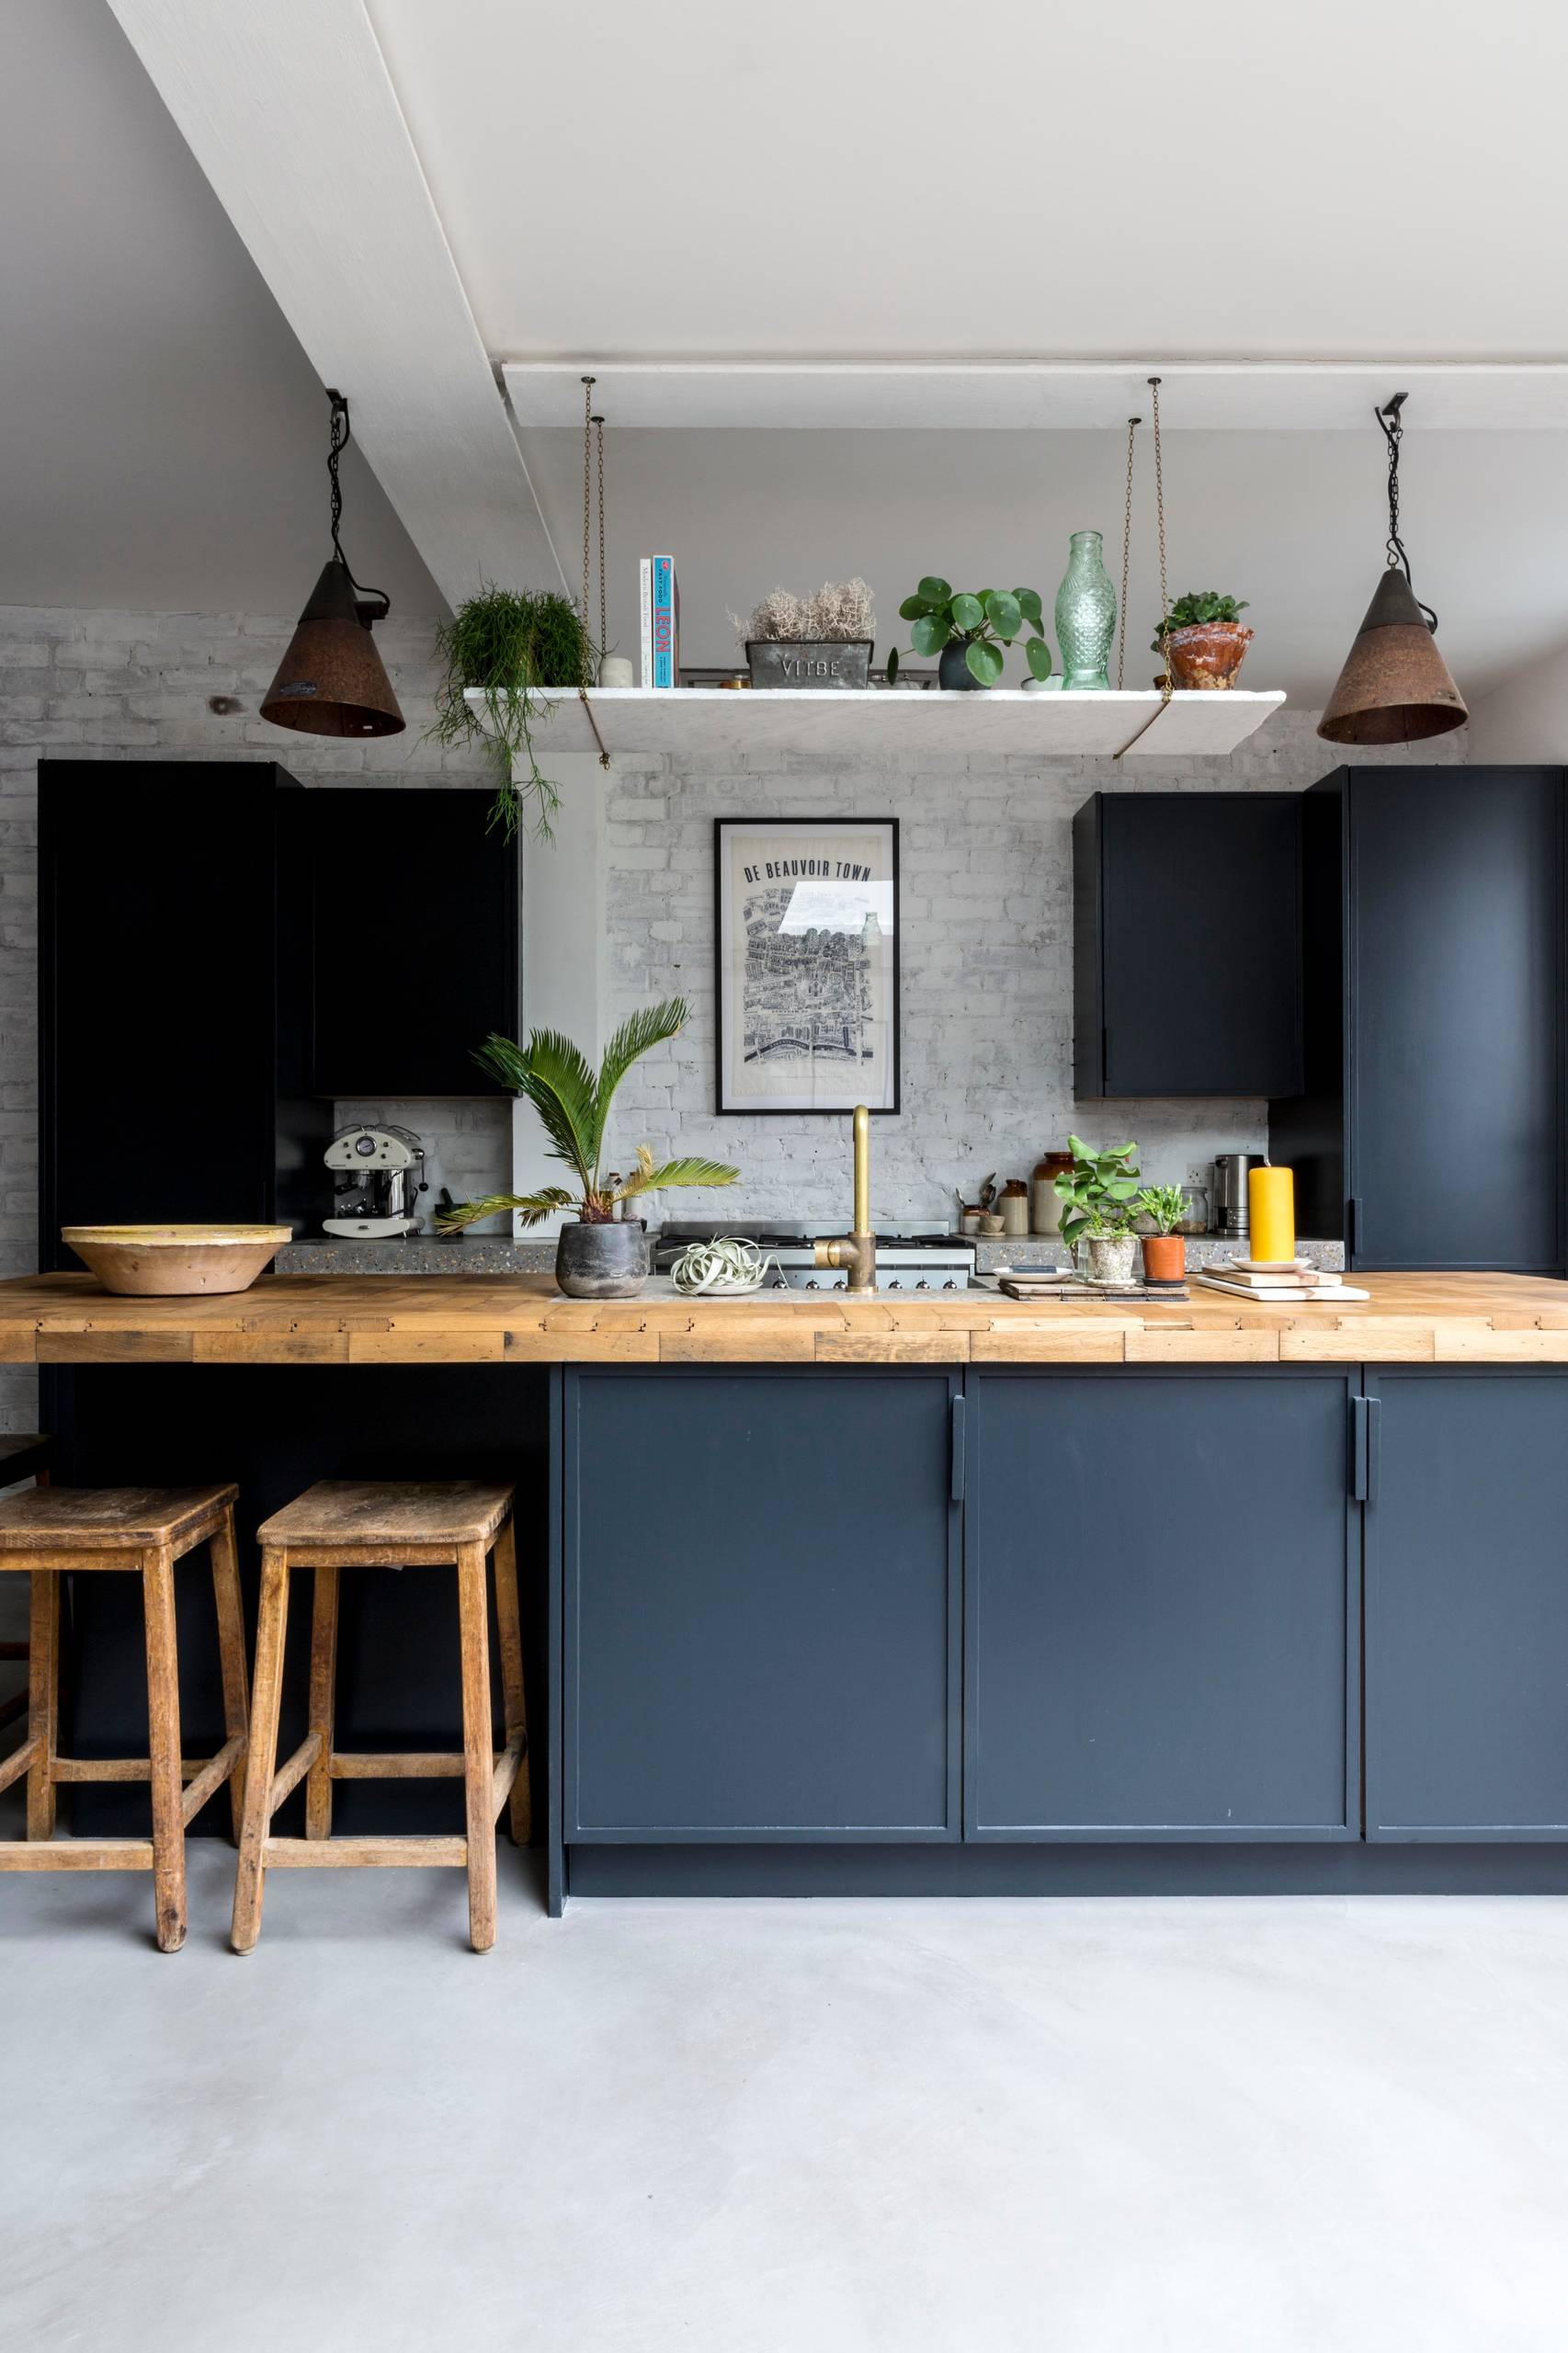 75 Beautiful Kitchen With Blue Cabinets And Wood Countertops Pictures Ideas June 2020 Houzz